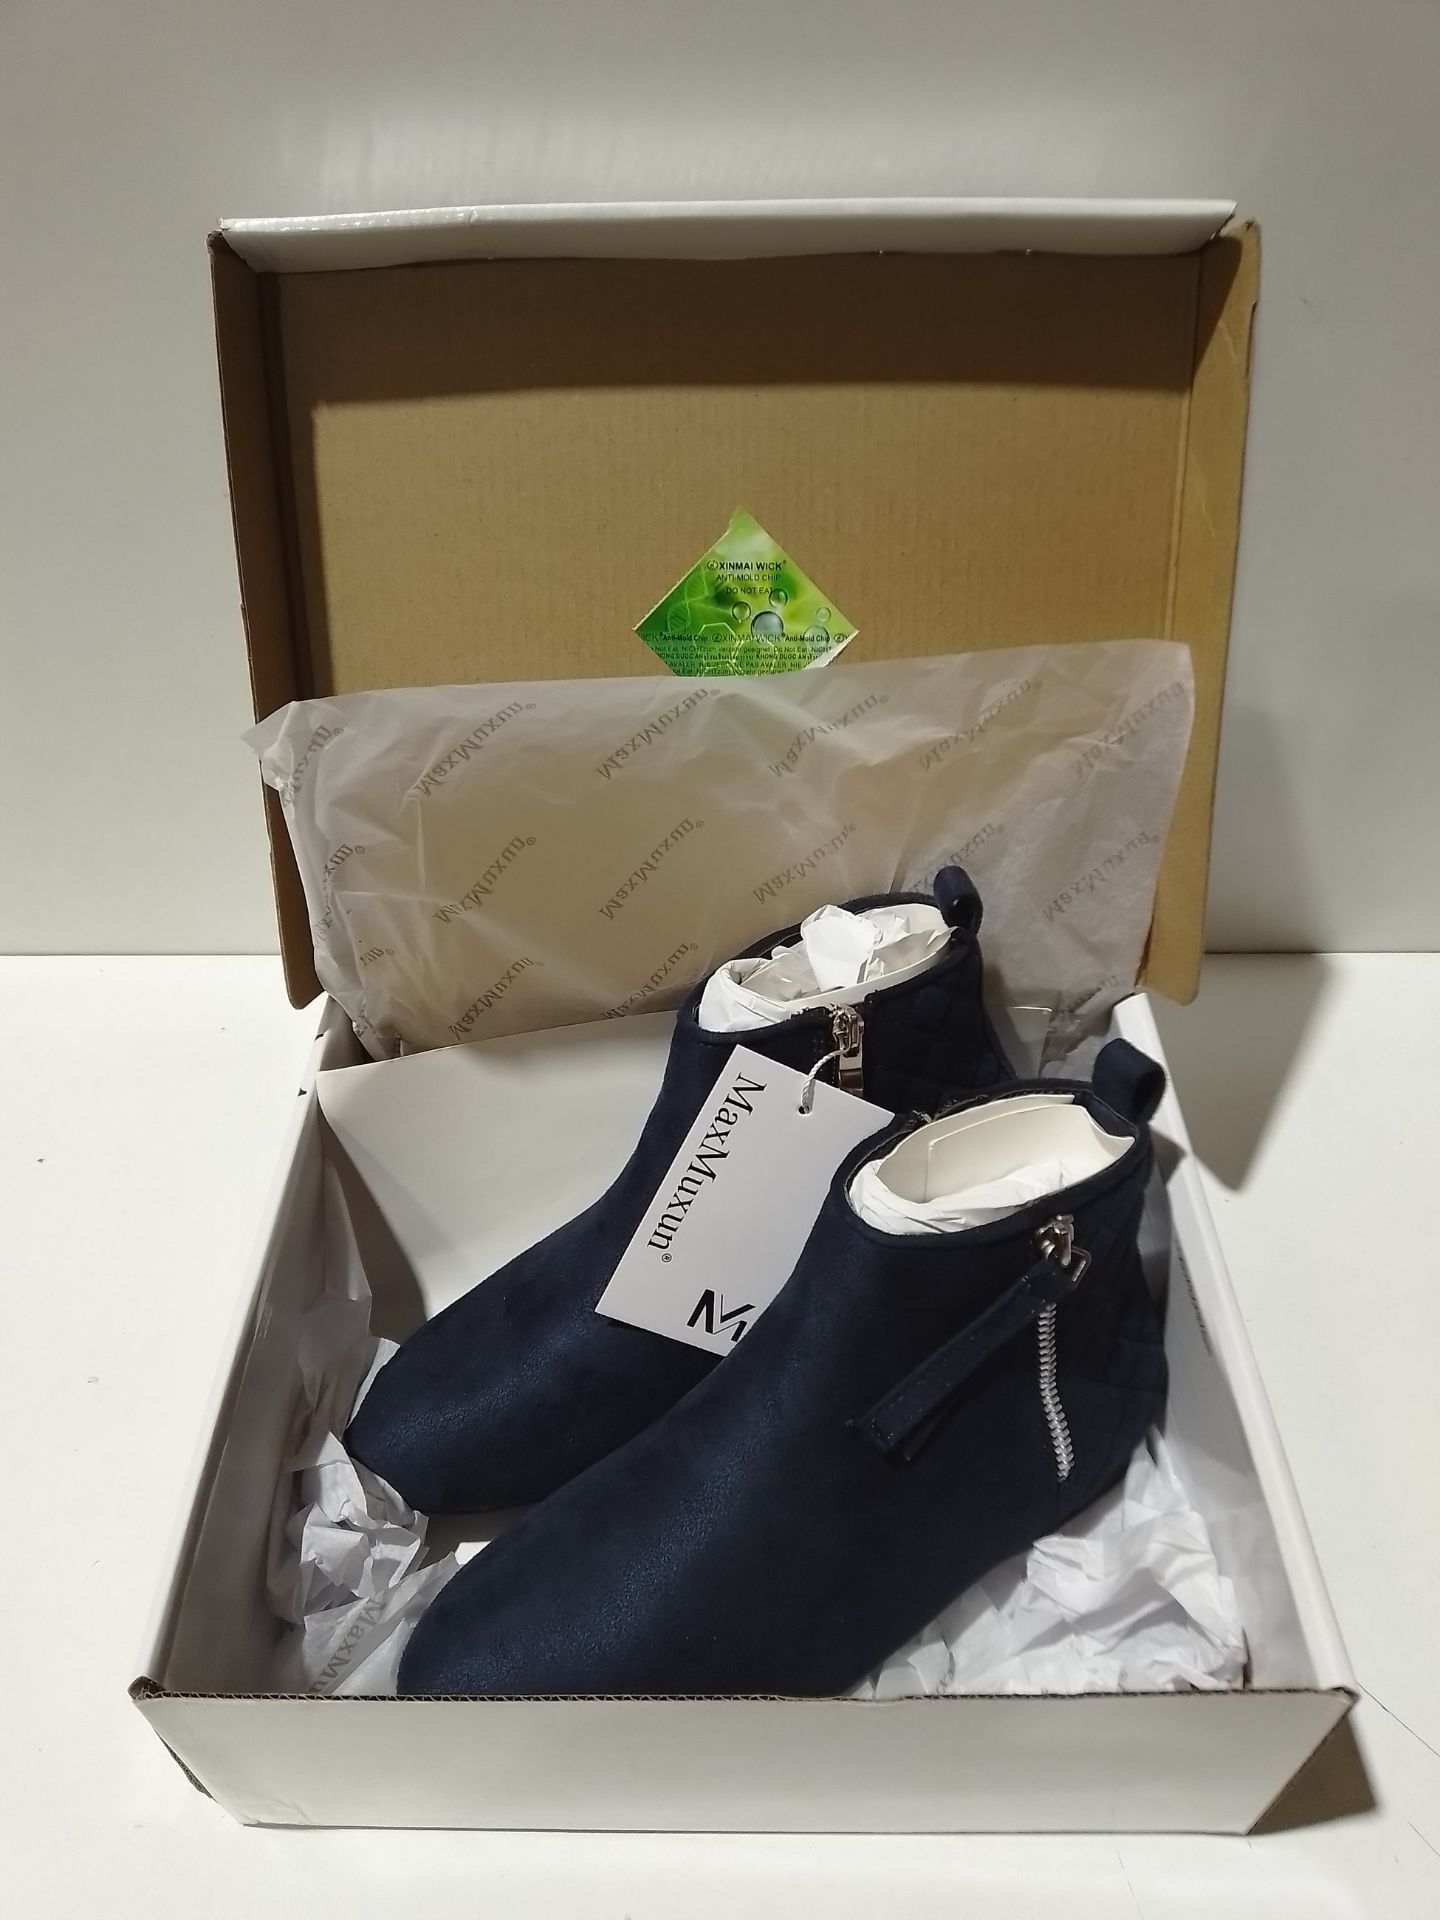 RRP £30.98 MaxMuxun Womens Zipper Flat Booties Faux Suede Classic Ankle Boots Blue 3 UK - Image 2 of 2